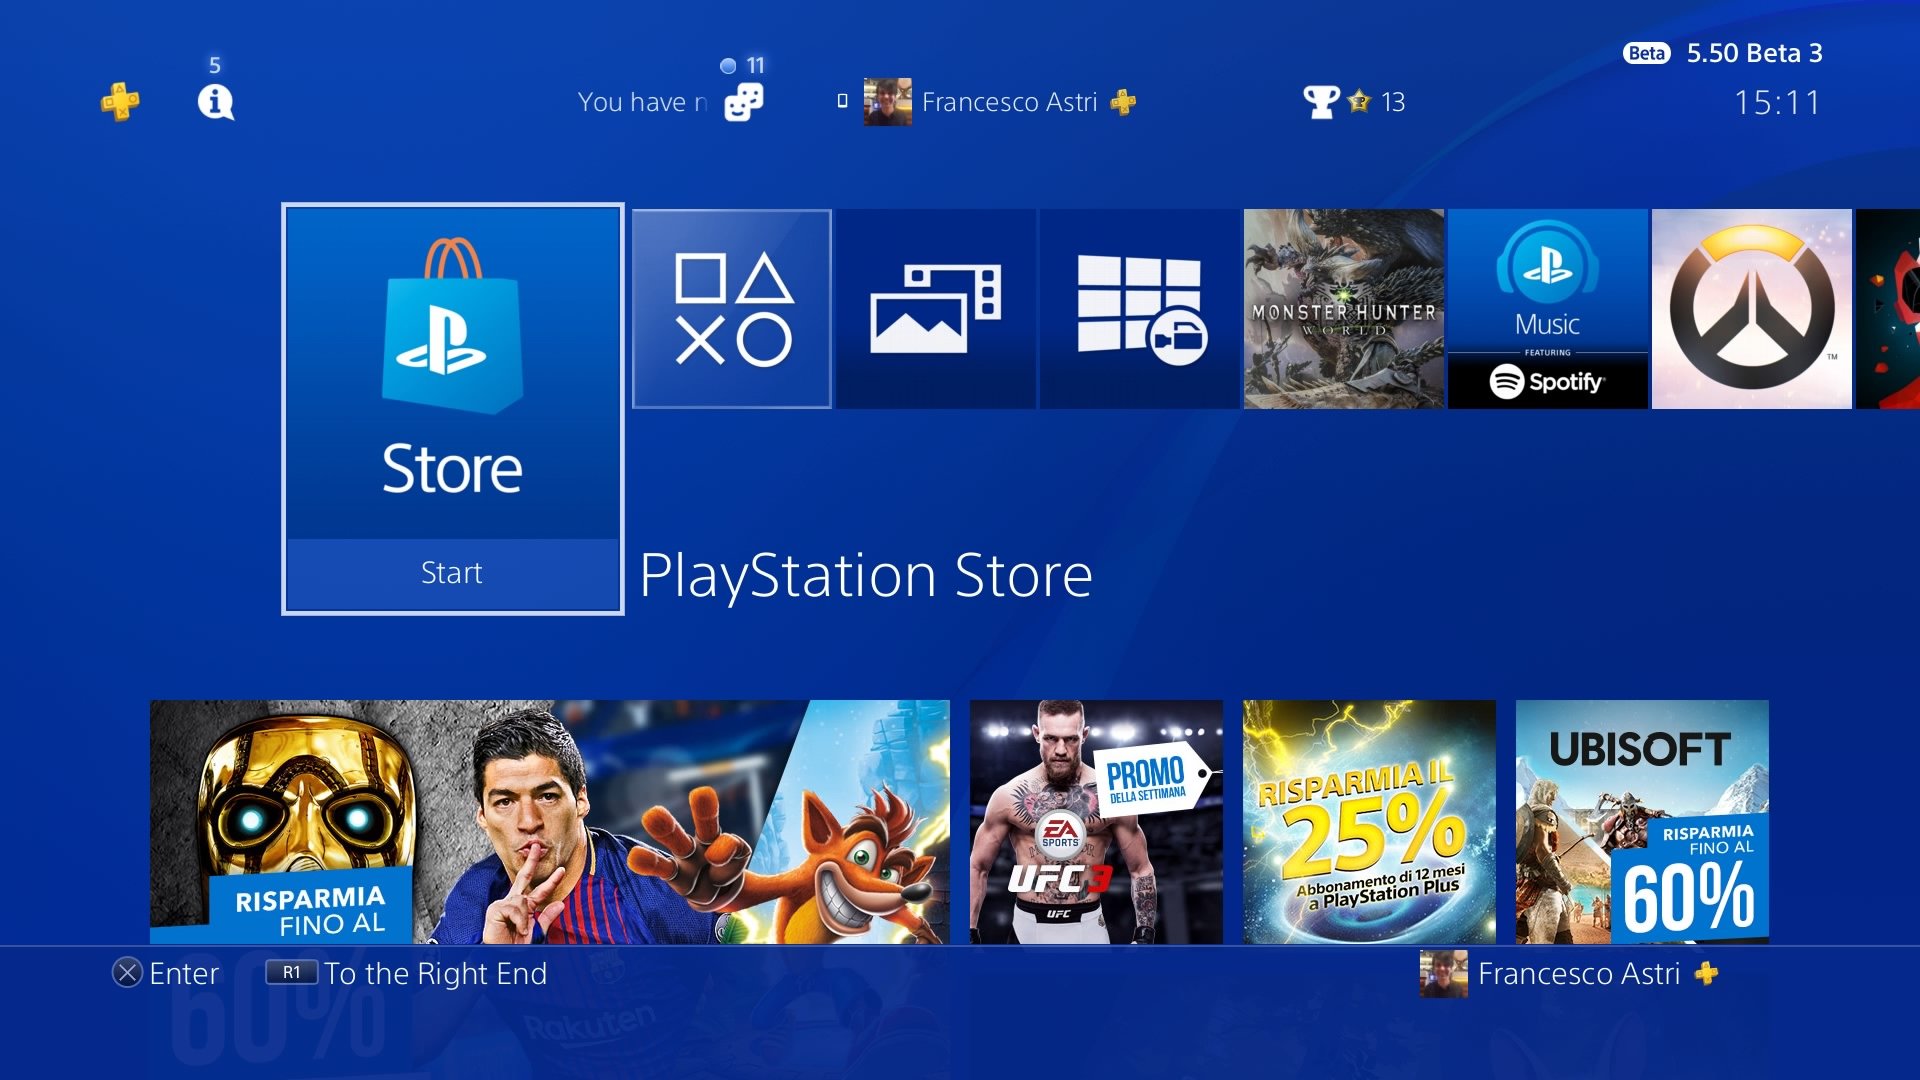 How to request a PlayStation Store refund